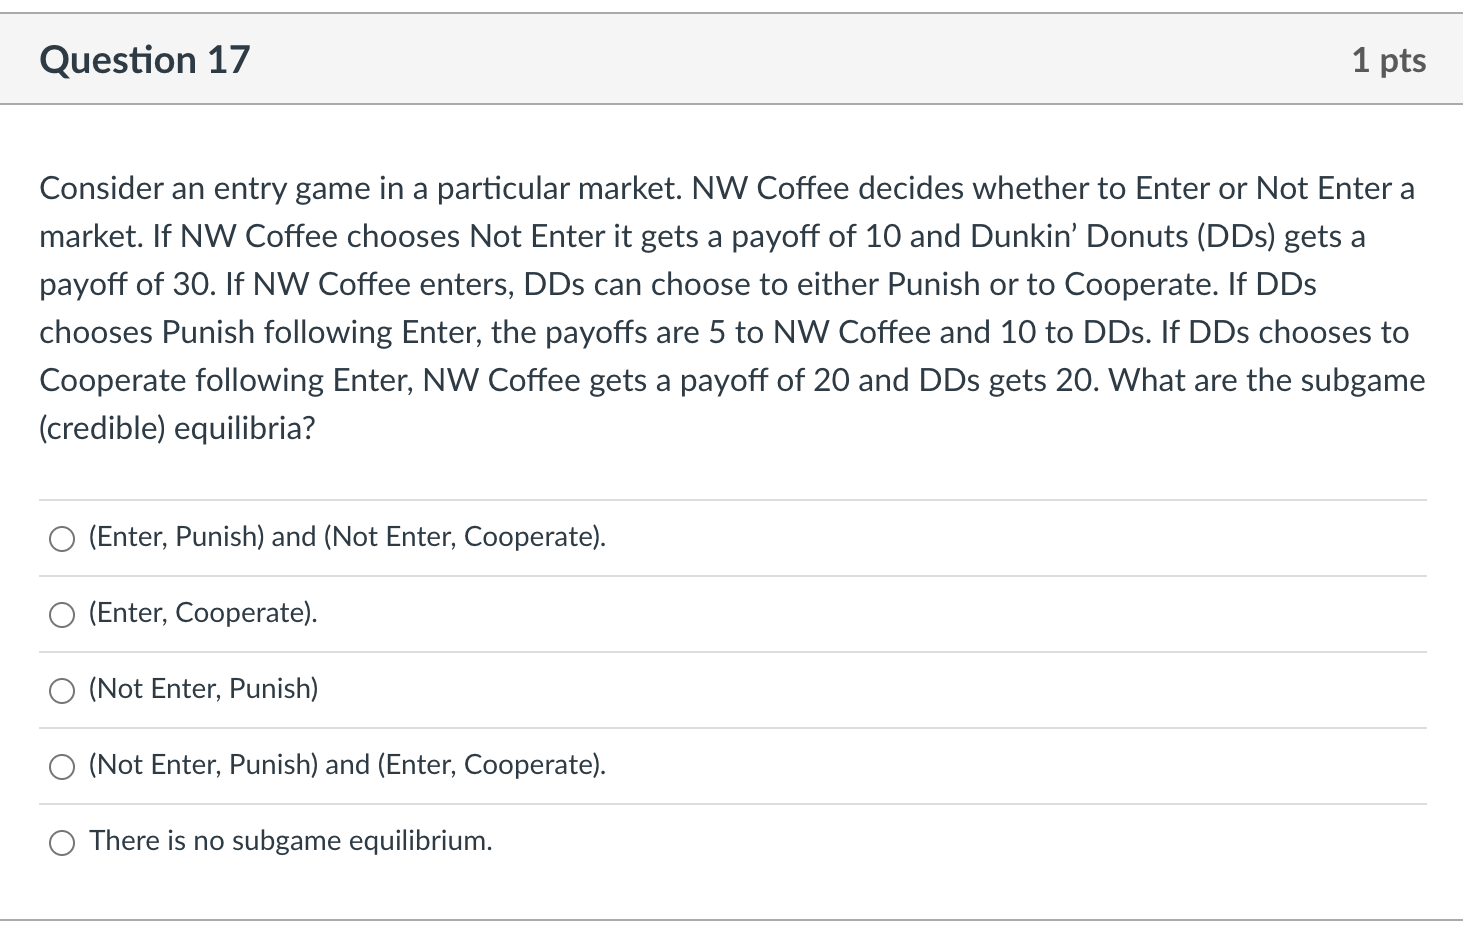 Consider an entry game in a particular market. NW Coffee decides whether to Enter or Not Enter a market. If NW Coffee chooses